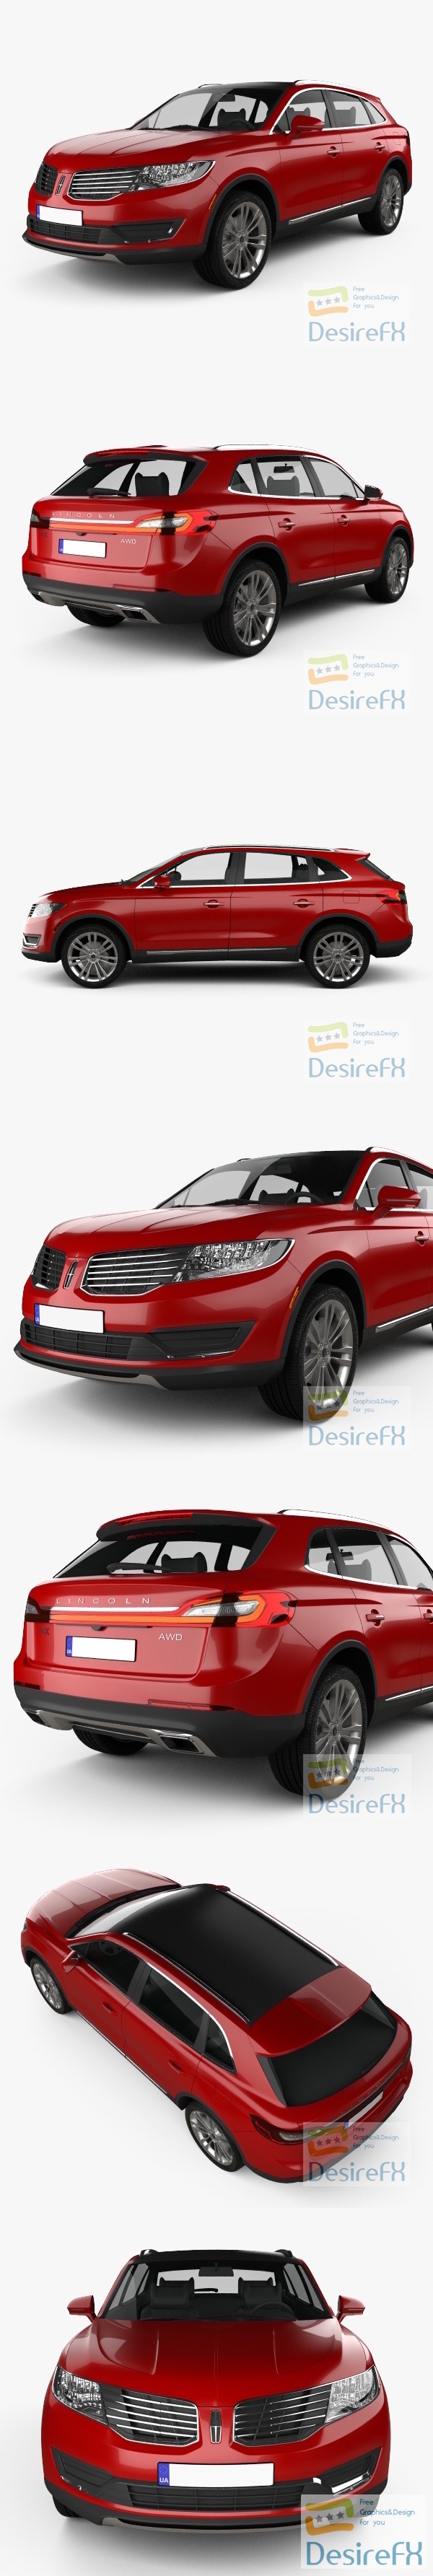 Lincoln MKX 2019 3D Model